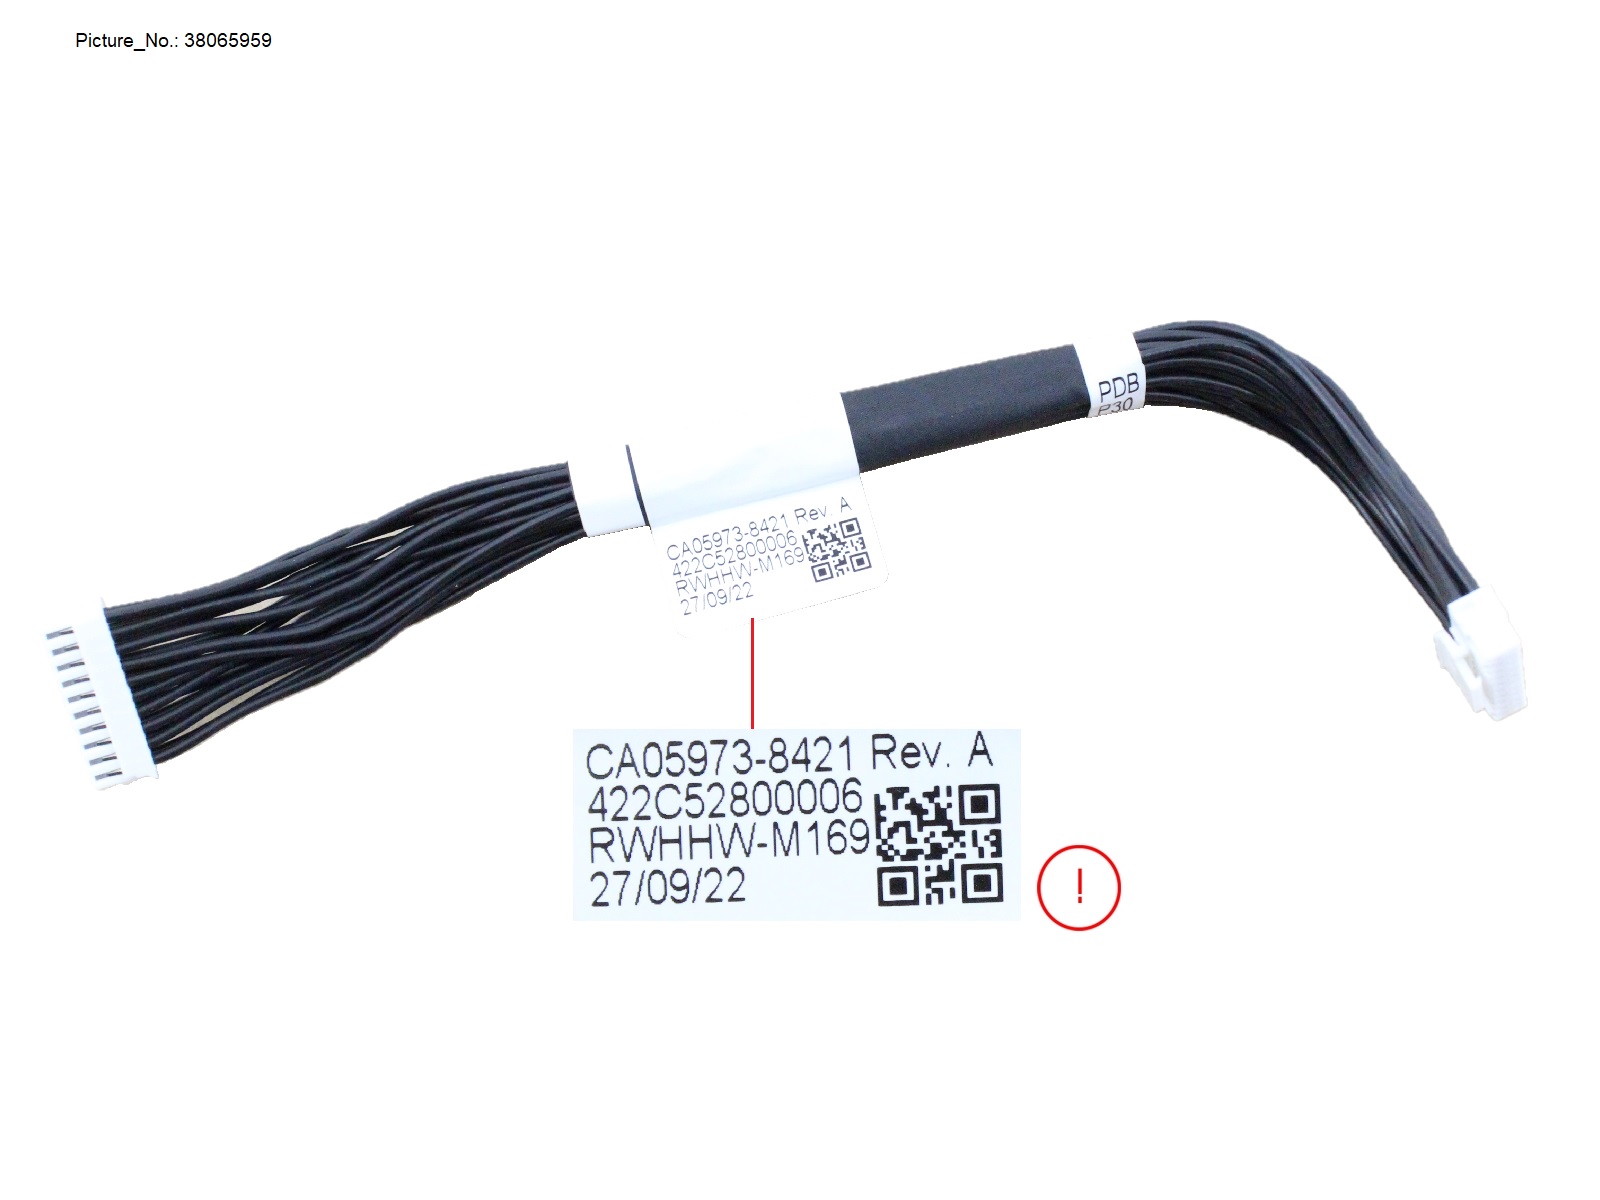 PDB SIGNAL CABLE